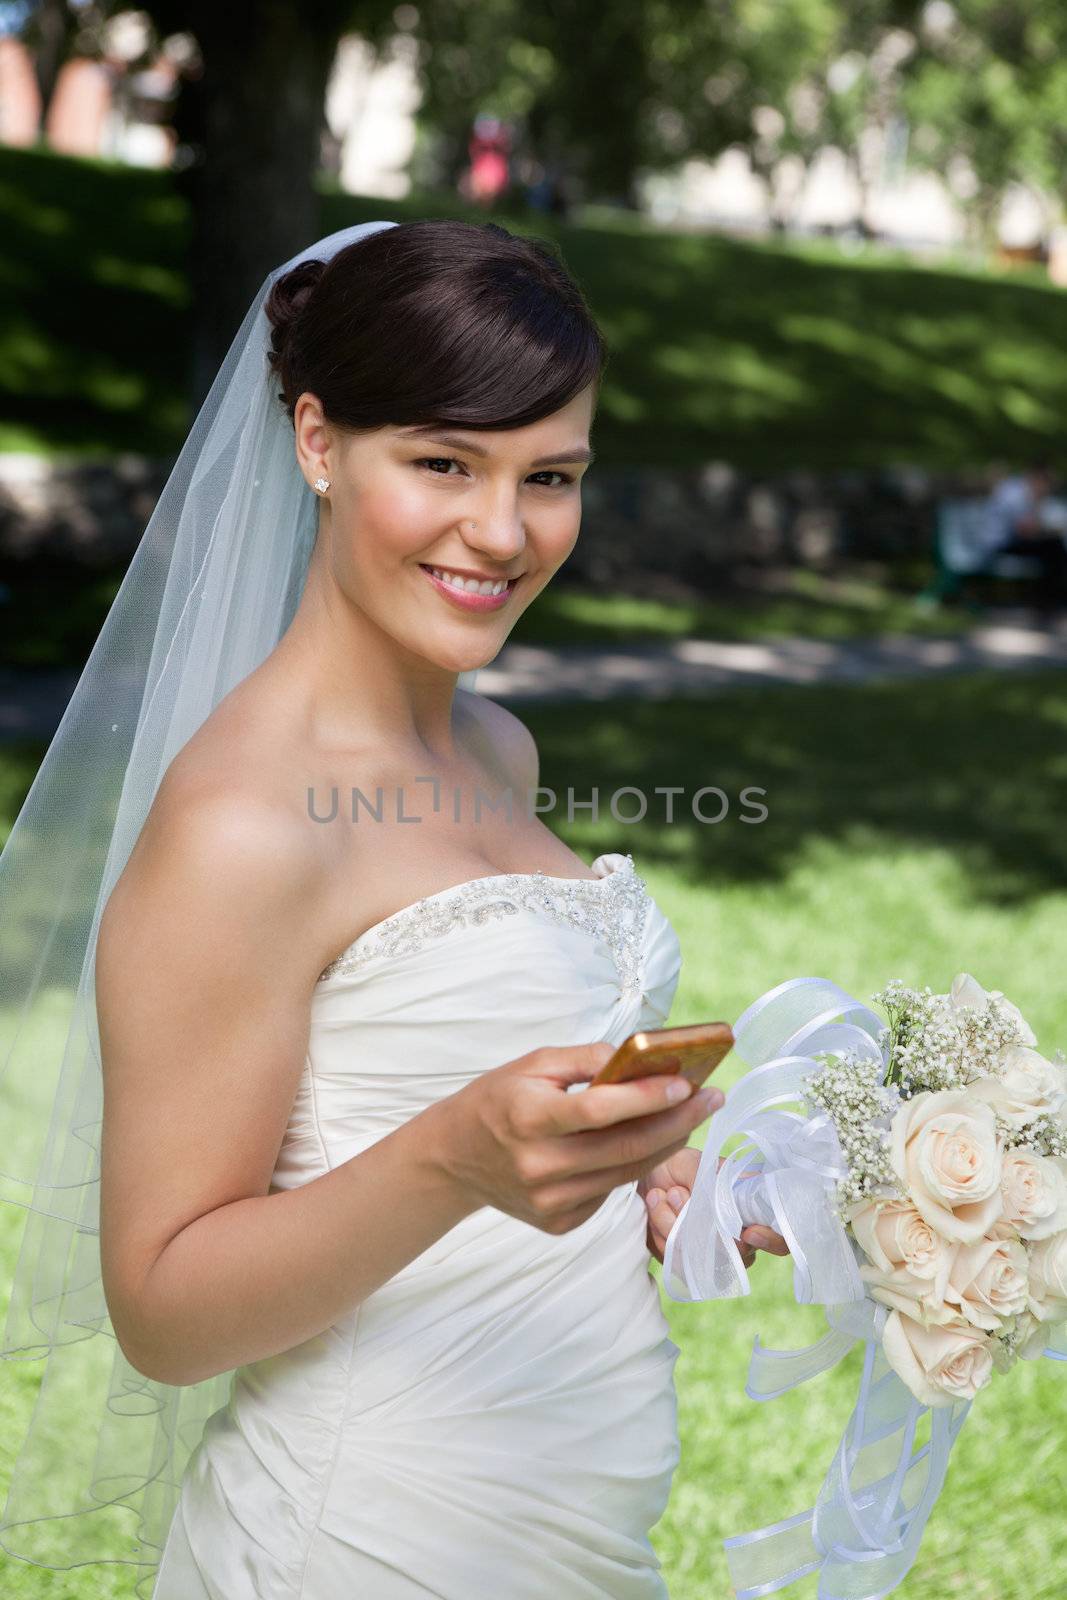 Portrait of smiling newlywed bride holding cell phone